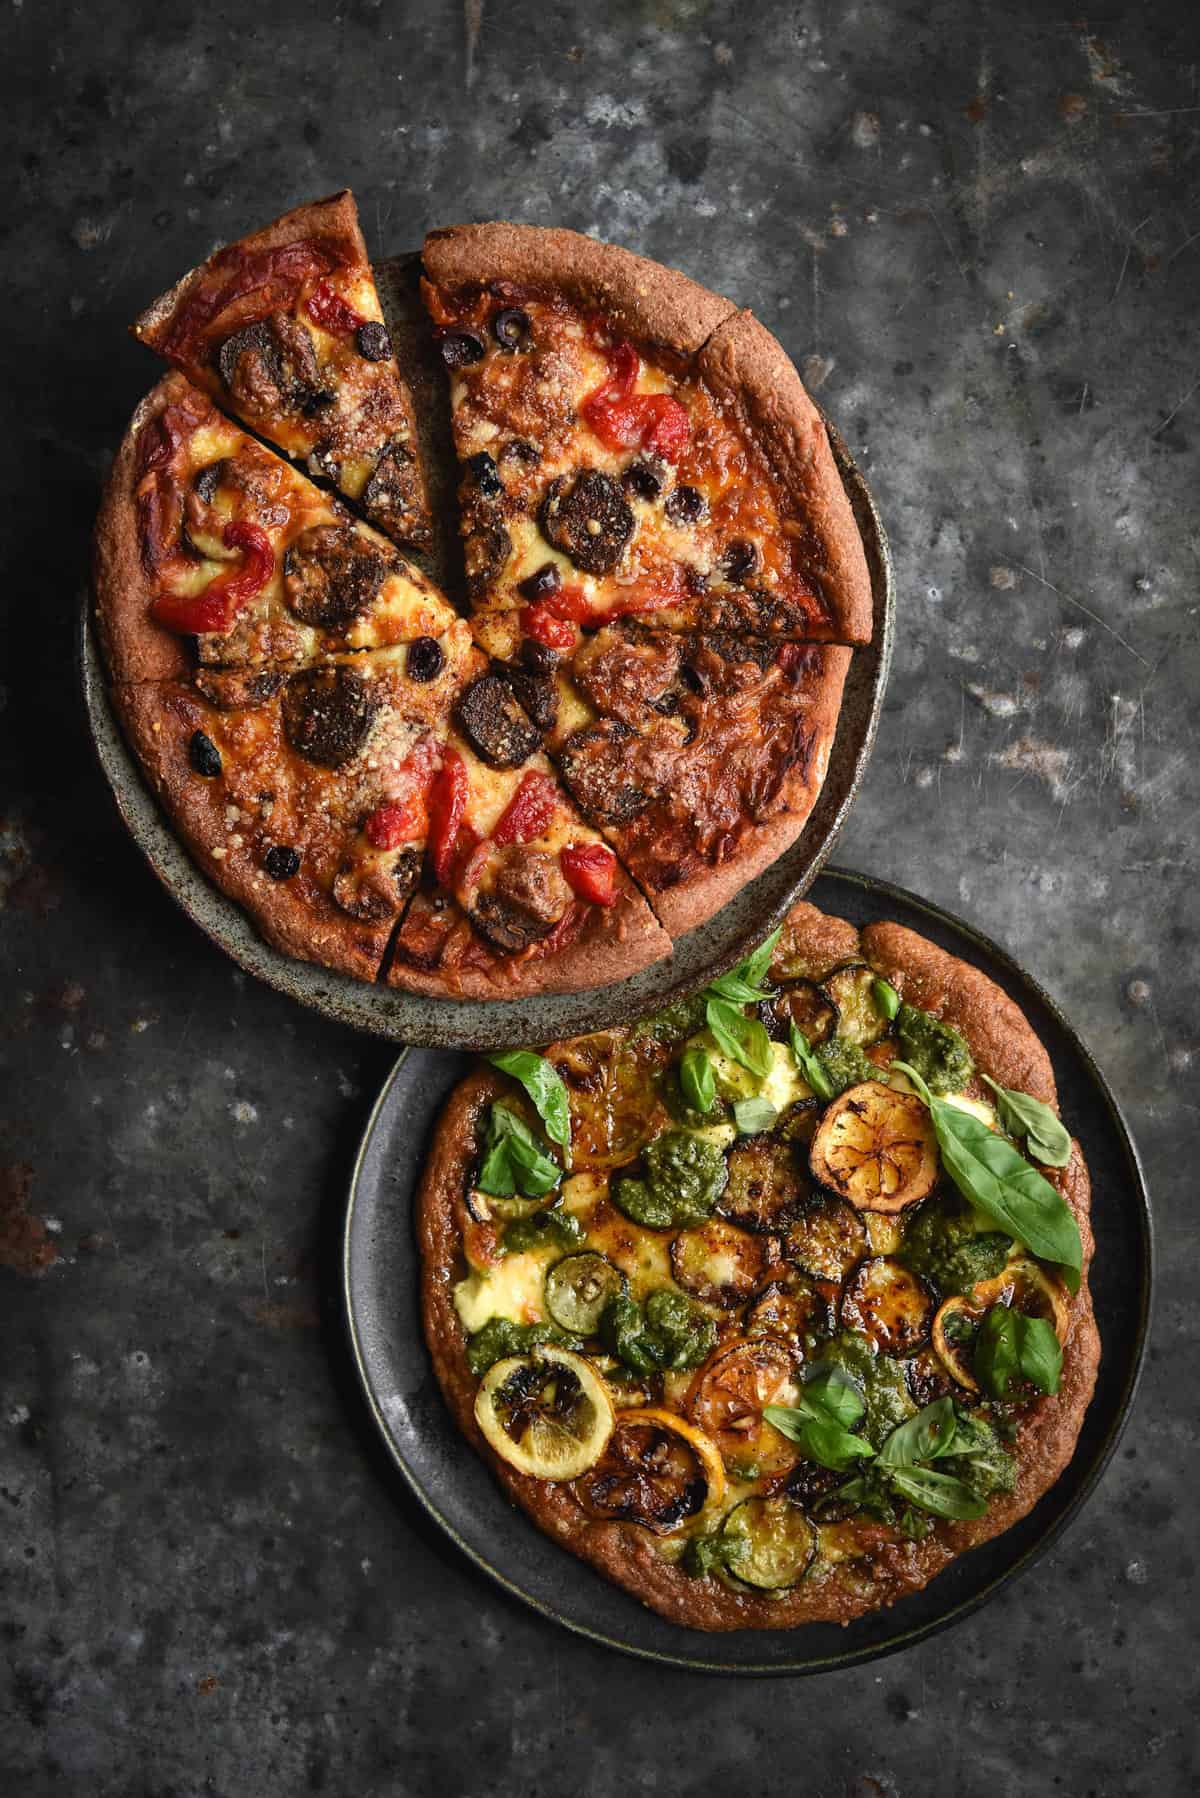 Two gluten free sourdough pizza bases against a blue mottled backdrop. One is a red pizza topped with vegetarian sausage, roasted capsicums and cheese, the other is a green pizza, topped with char grilled zucchini and lemons, pesto and basil